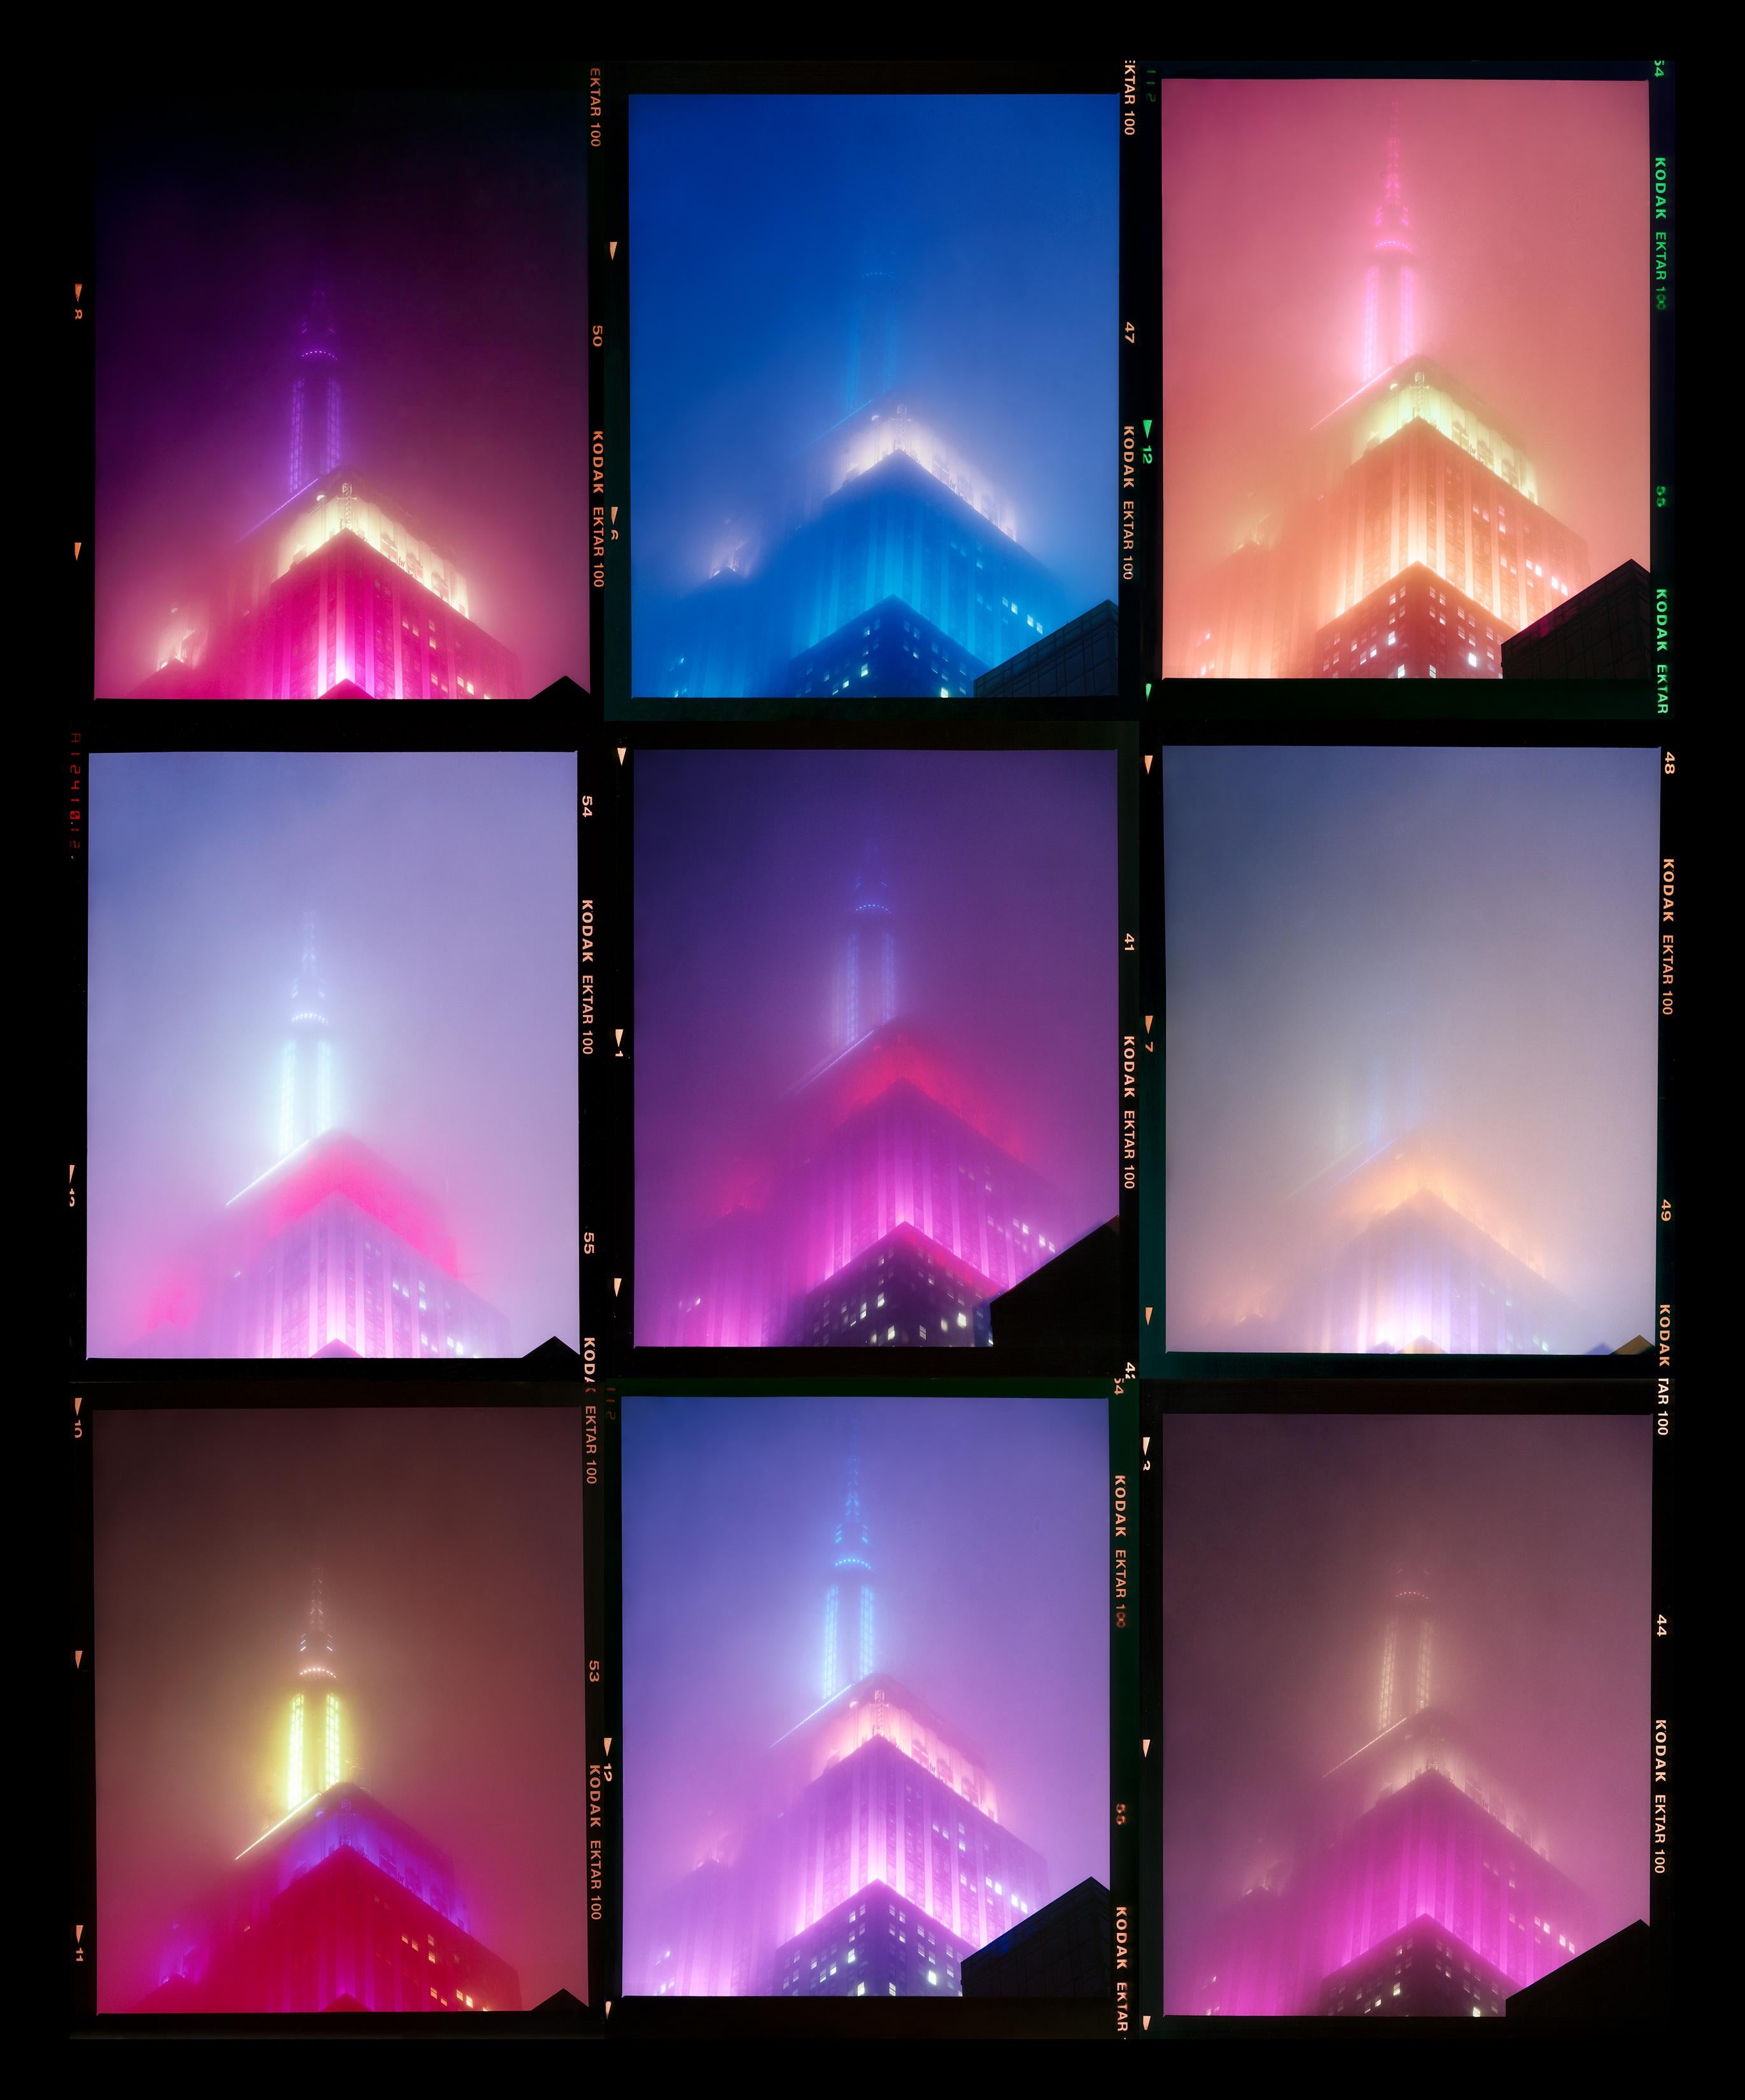 NOMAD, New York, photography by Richard Heeps capturing the iconic Empire State building in the mist as part of his series The Streets of New York. A sequence of photographs capturing the art deco architecture illuminated in changing colours.  This